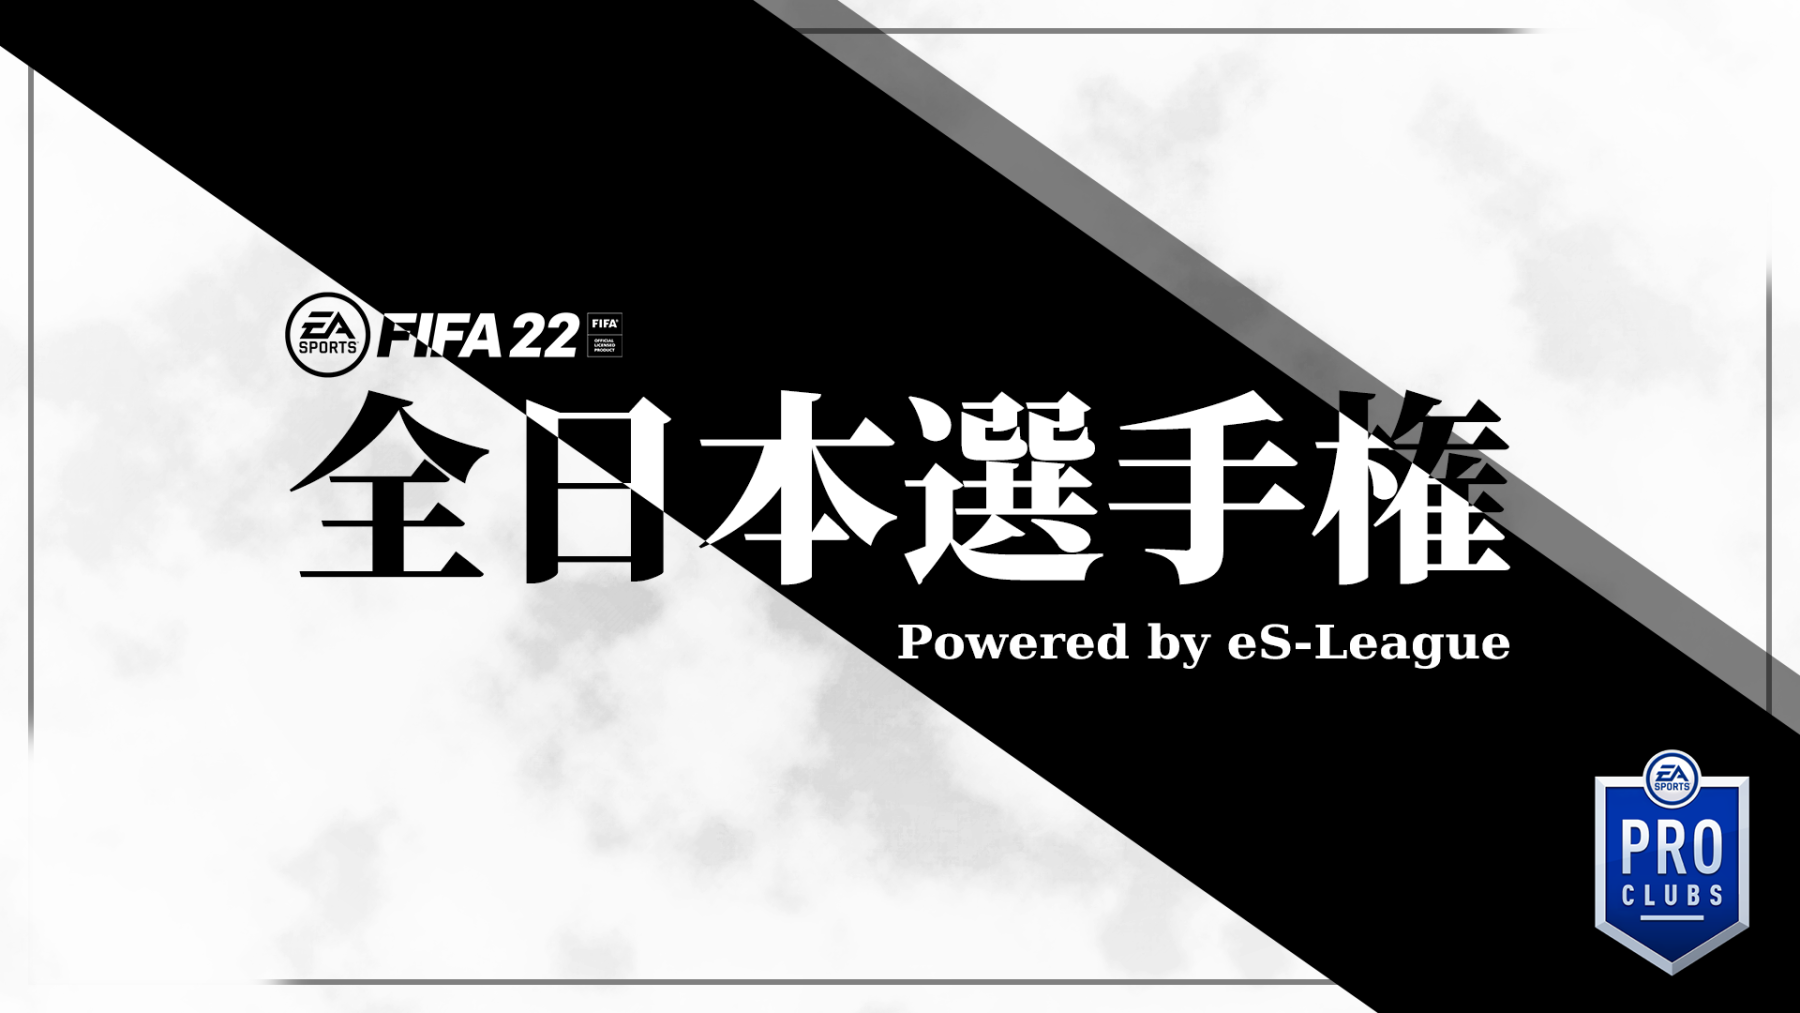 Es Leagueによるプロクラブ大会 Fifa22 全日本選手権 Powered By Es League の開催が決定 8月5日より開幕 22年7月27日 エキサイトニュース